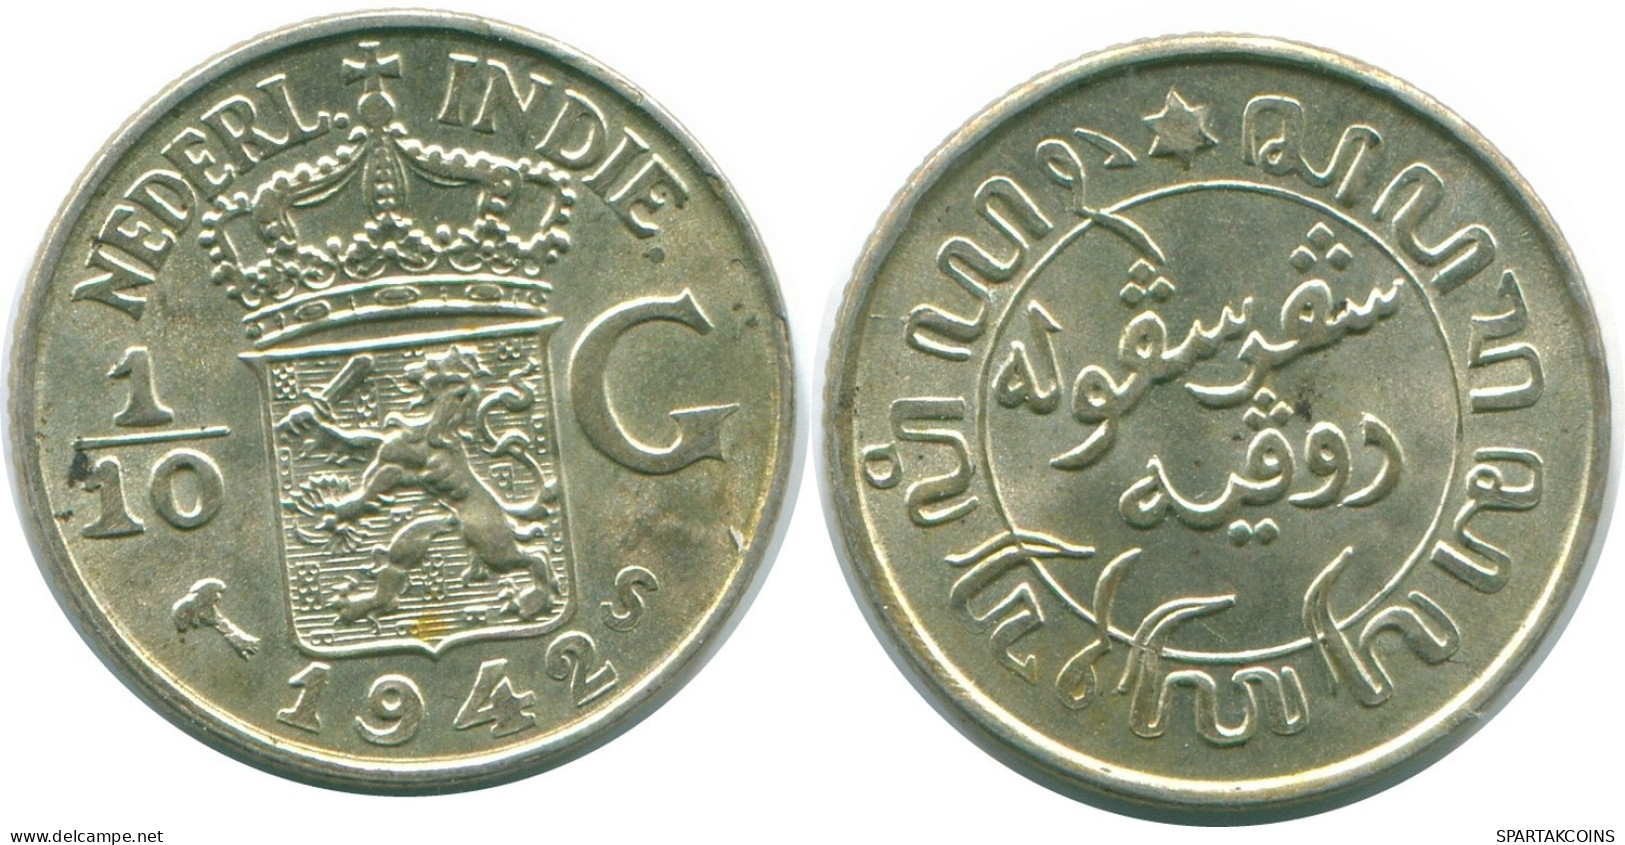 1/10 GULDEN 1942 NETHERLANDS EAST INDIES SILVER Colonial Coin #NL13953.3.U.A - Dutch East Indies